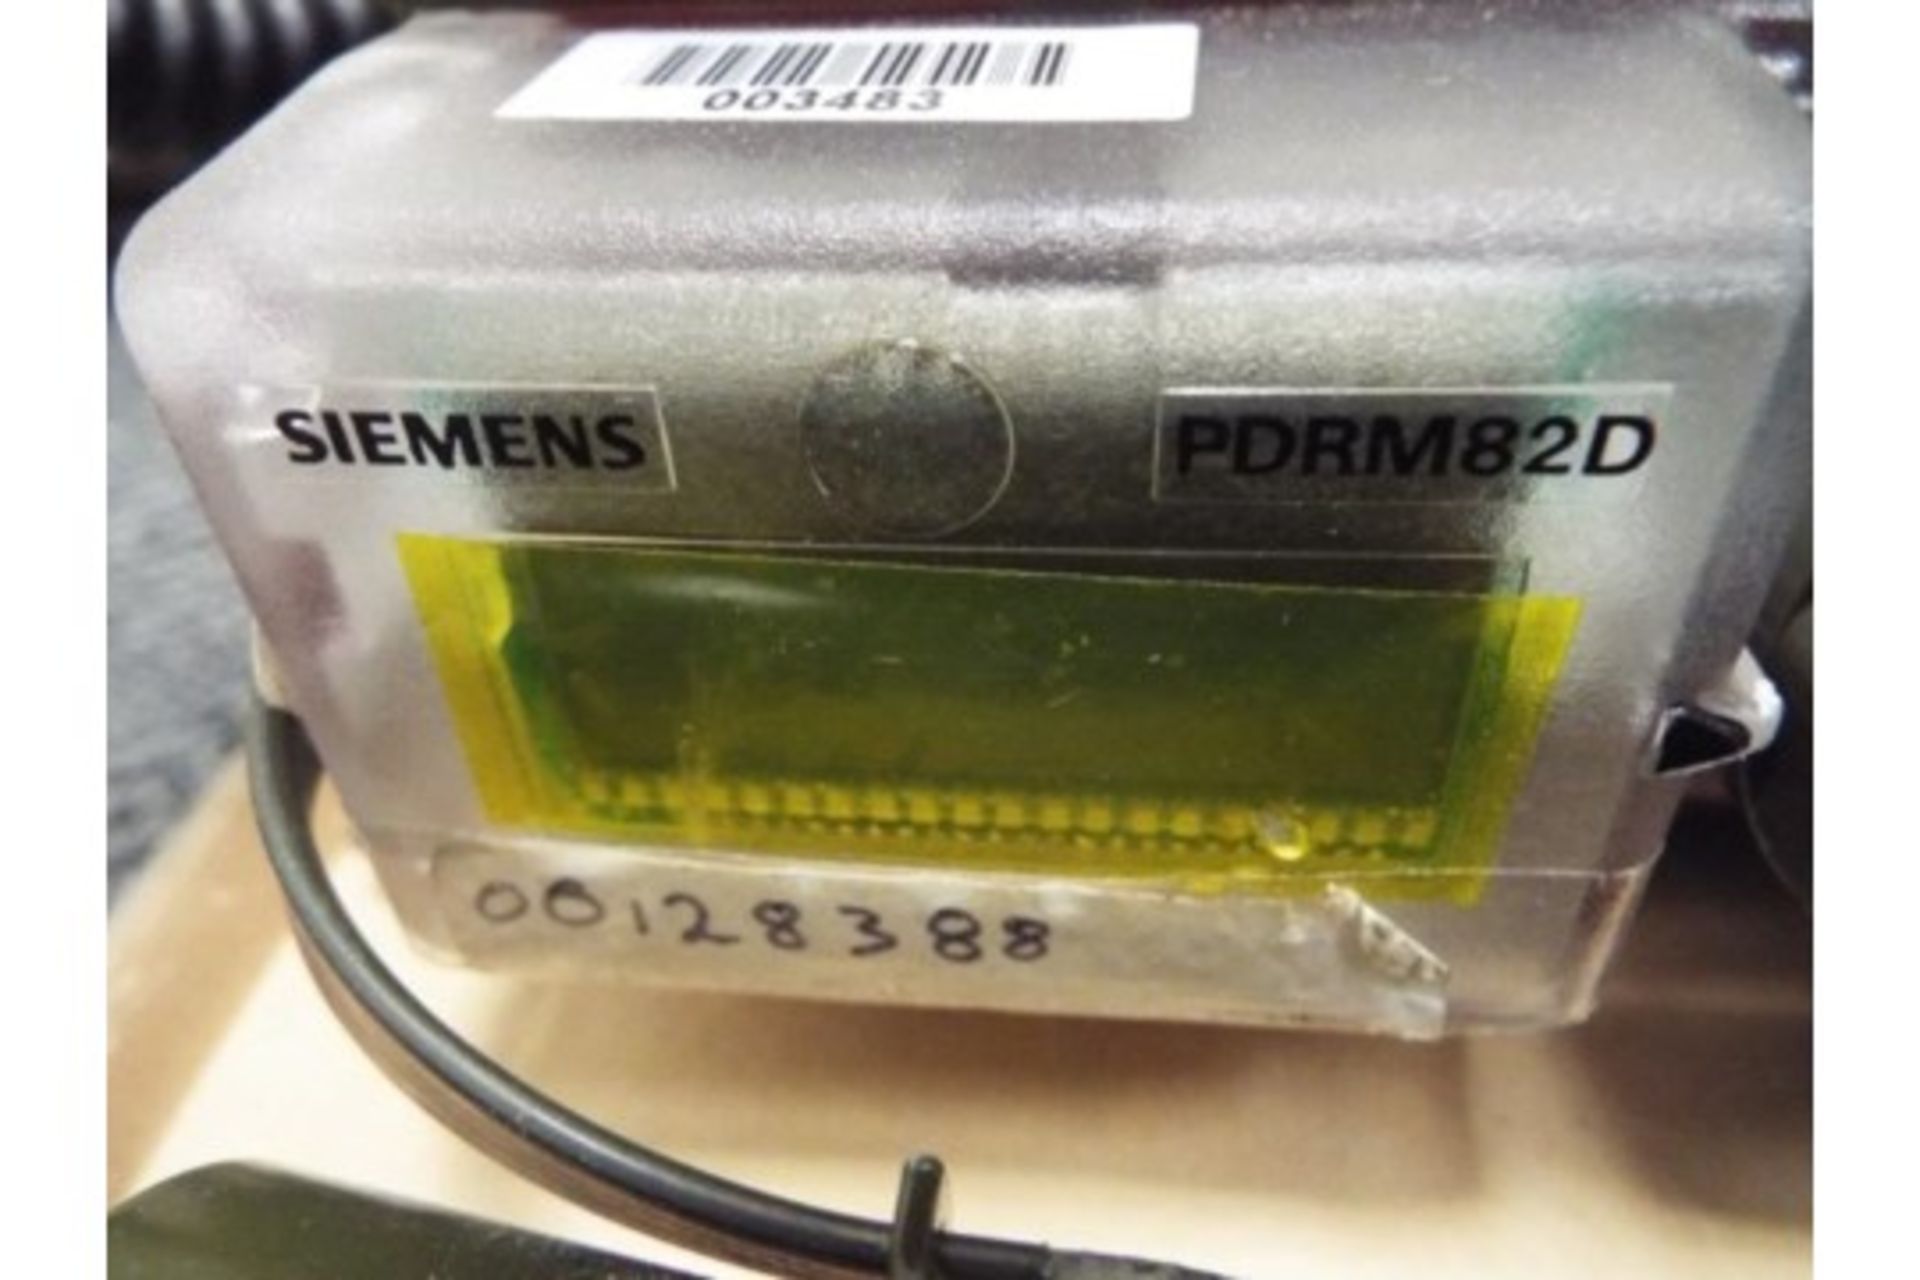 Siemens PDRM82D Portable Dose Rate Meter - Image 4 of 9